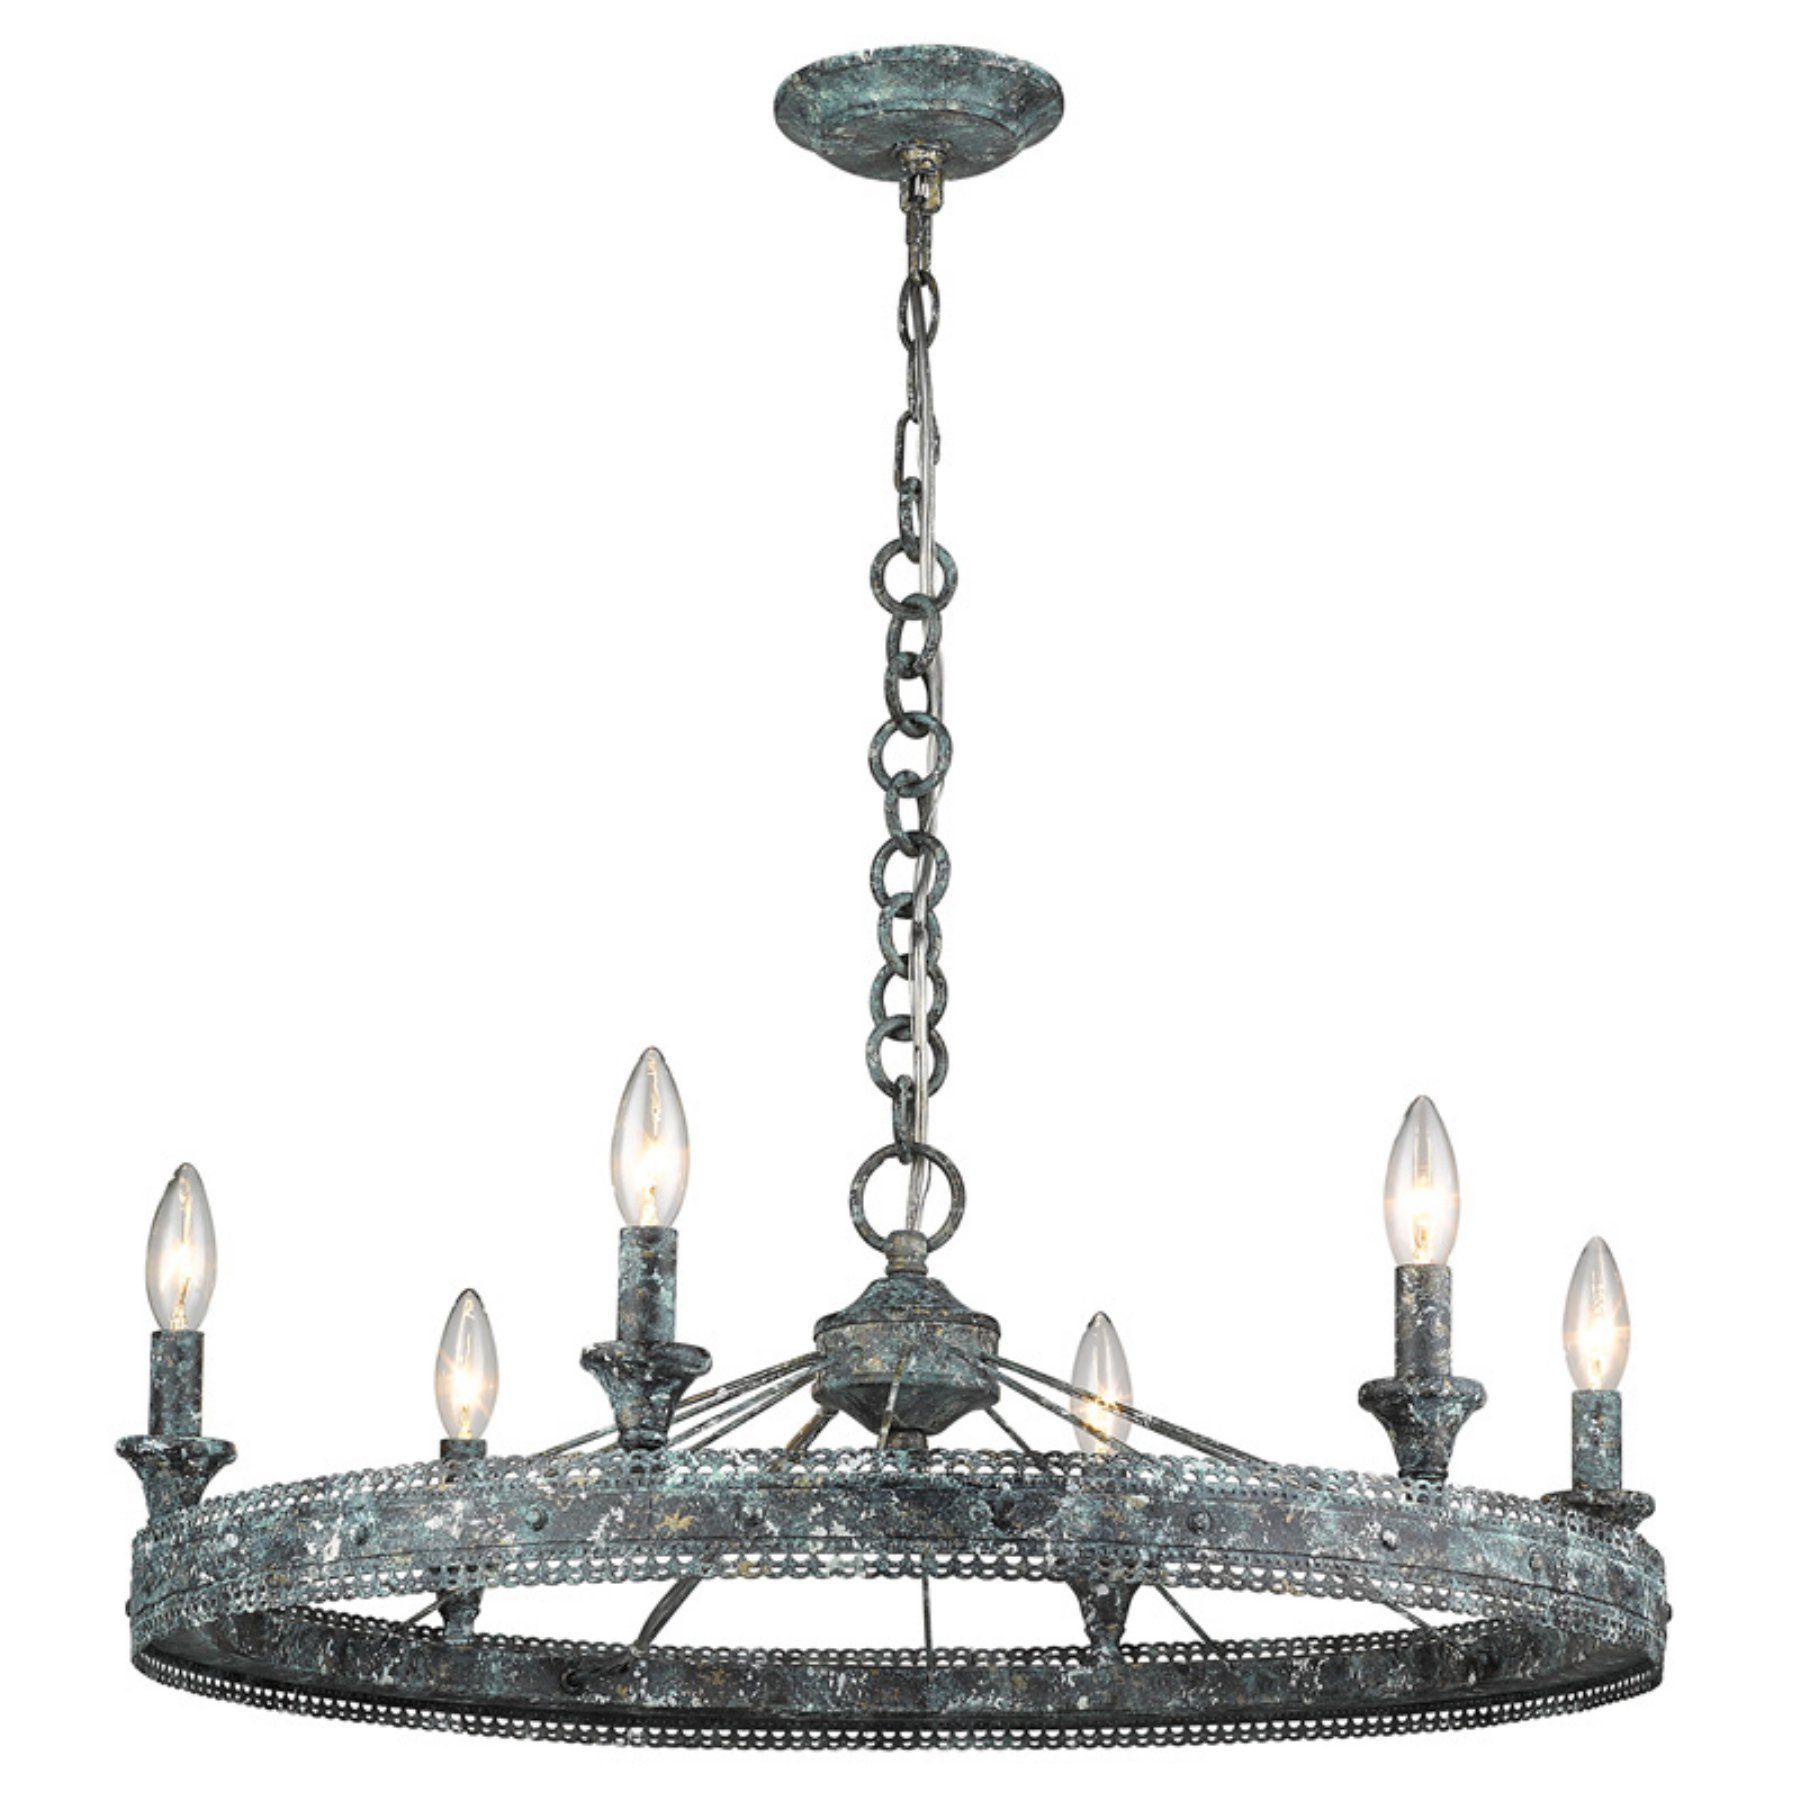 Golden Lighting Ferris 7856 Chandelier | Products | Lighting Regarding Bouchette Traditional 6 Light Candle Style Chandeliers (View 30 of 30)